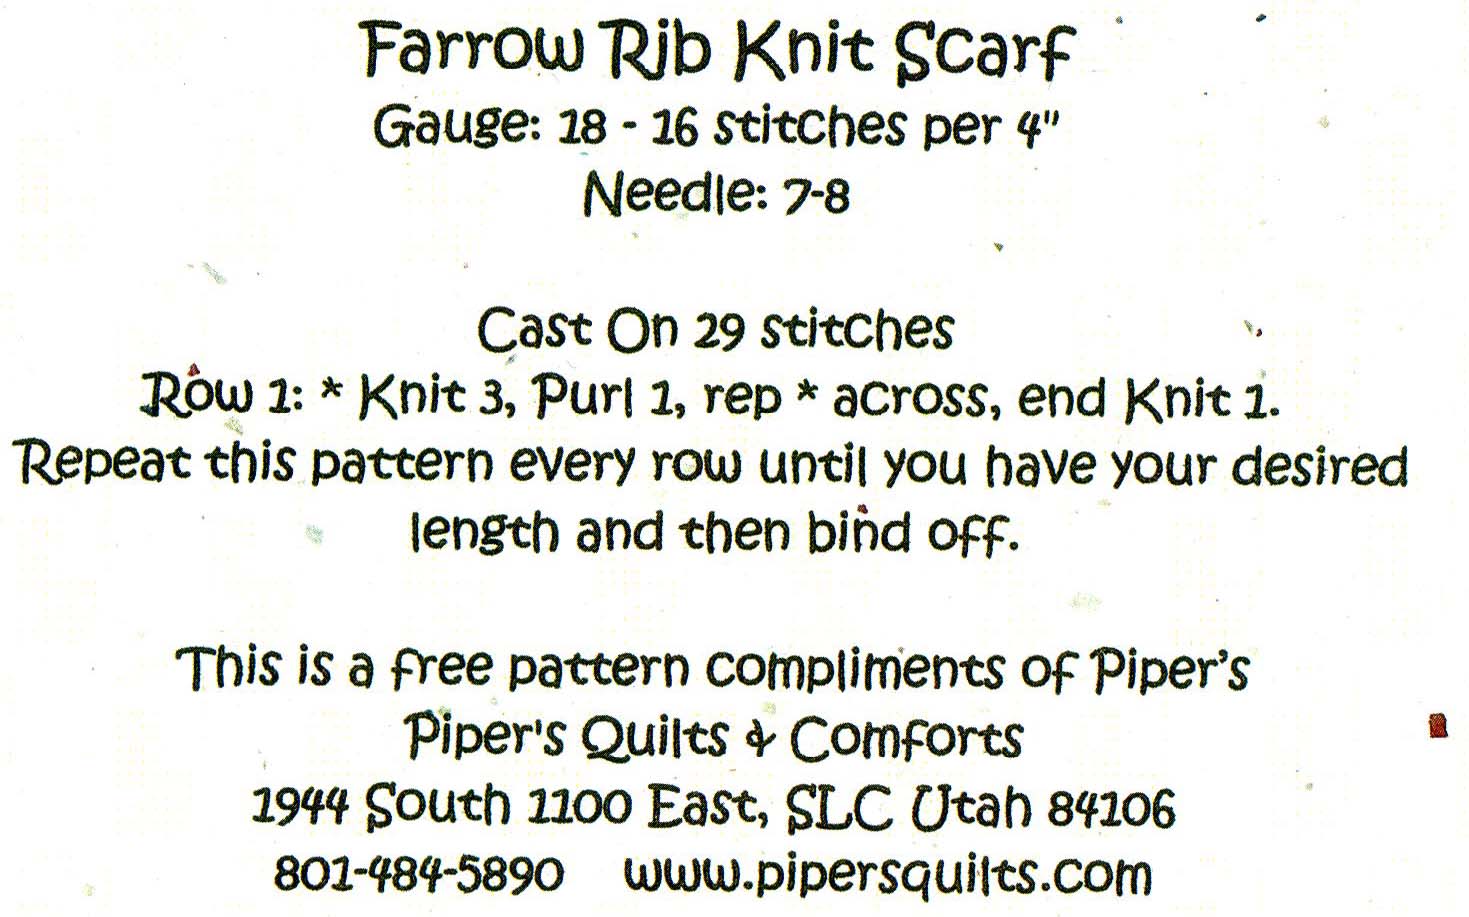 Bulky Ribbed Scarf - Free Knitting Pattern for a Ribbed Scarf